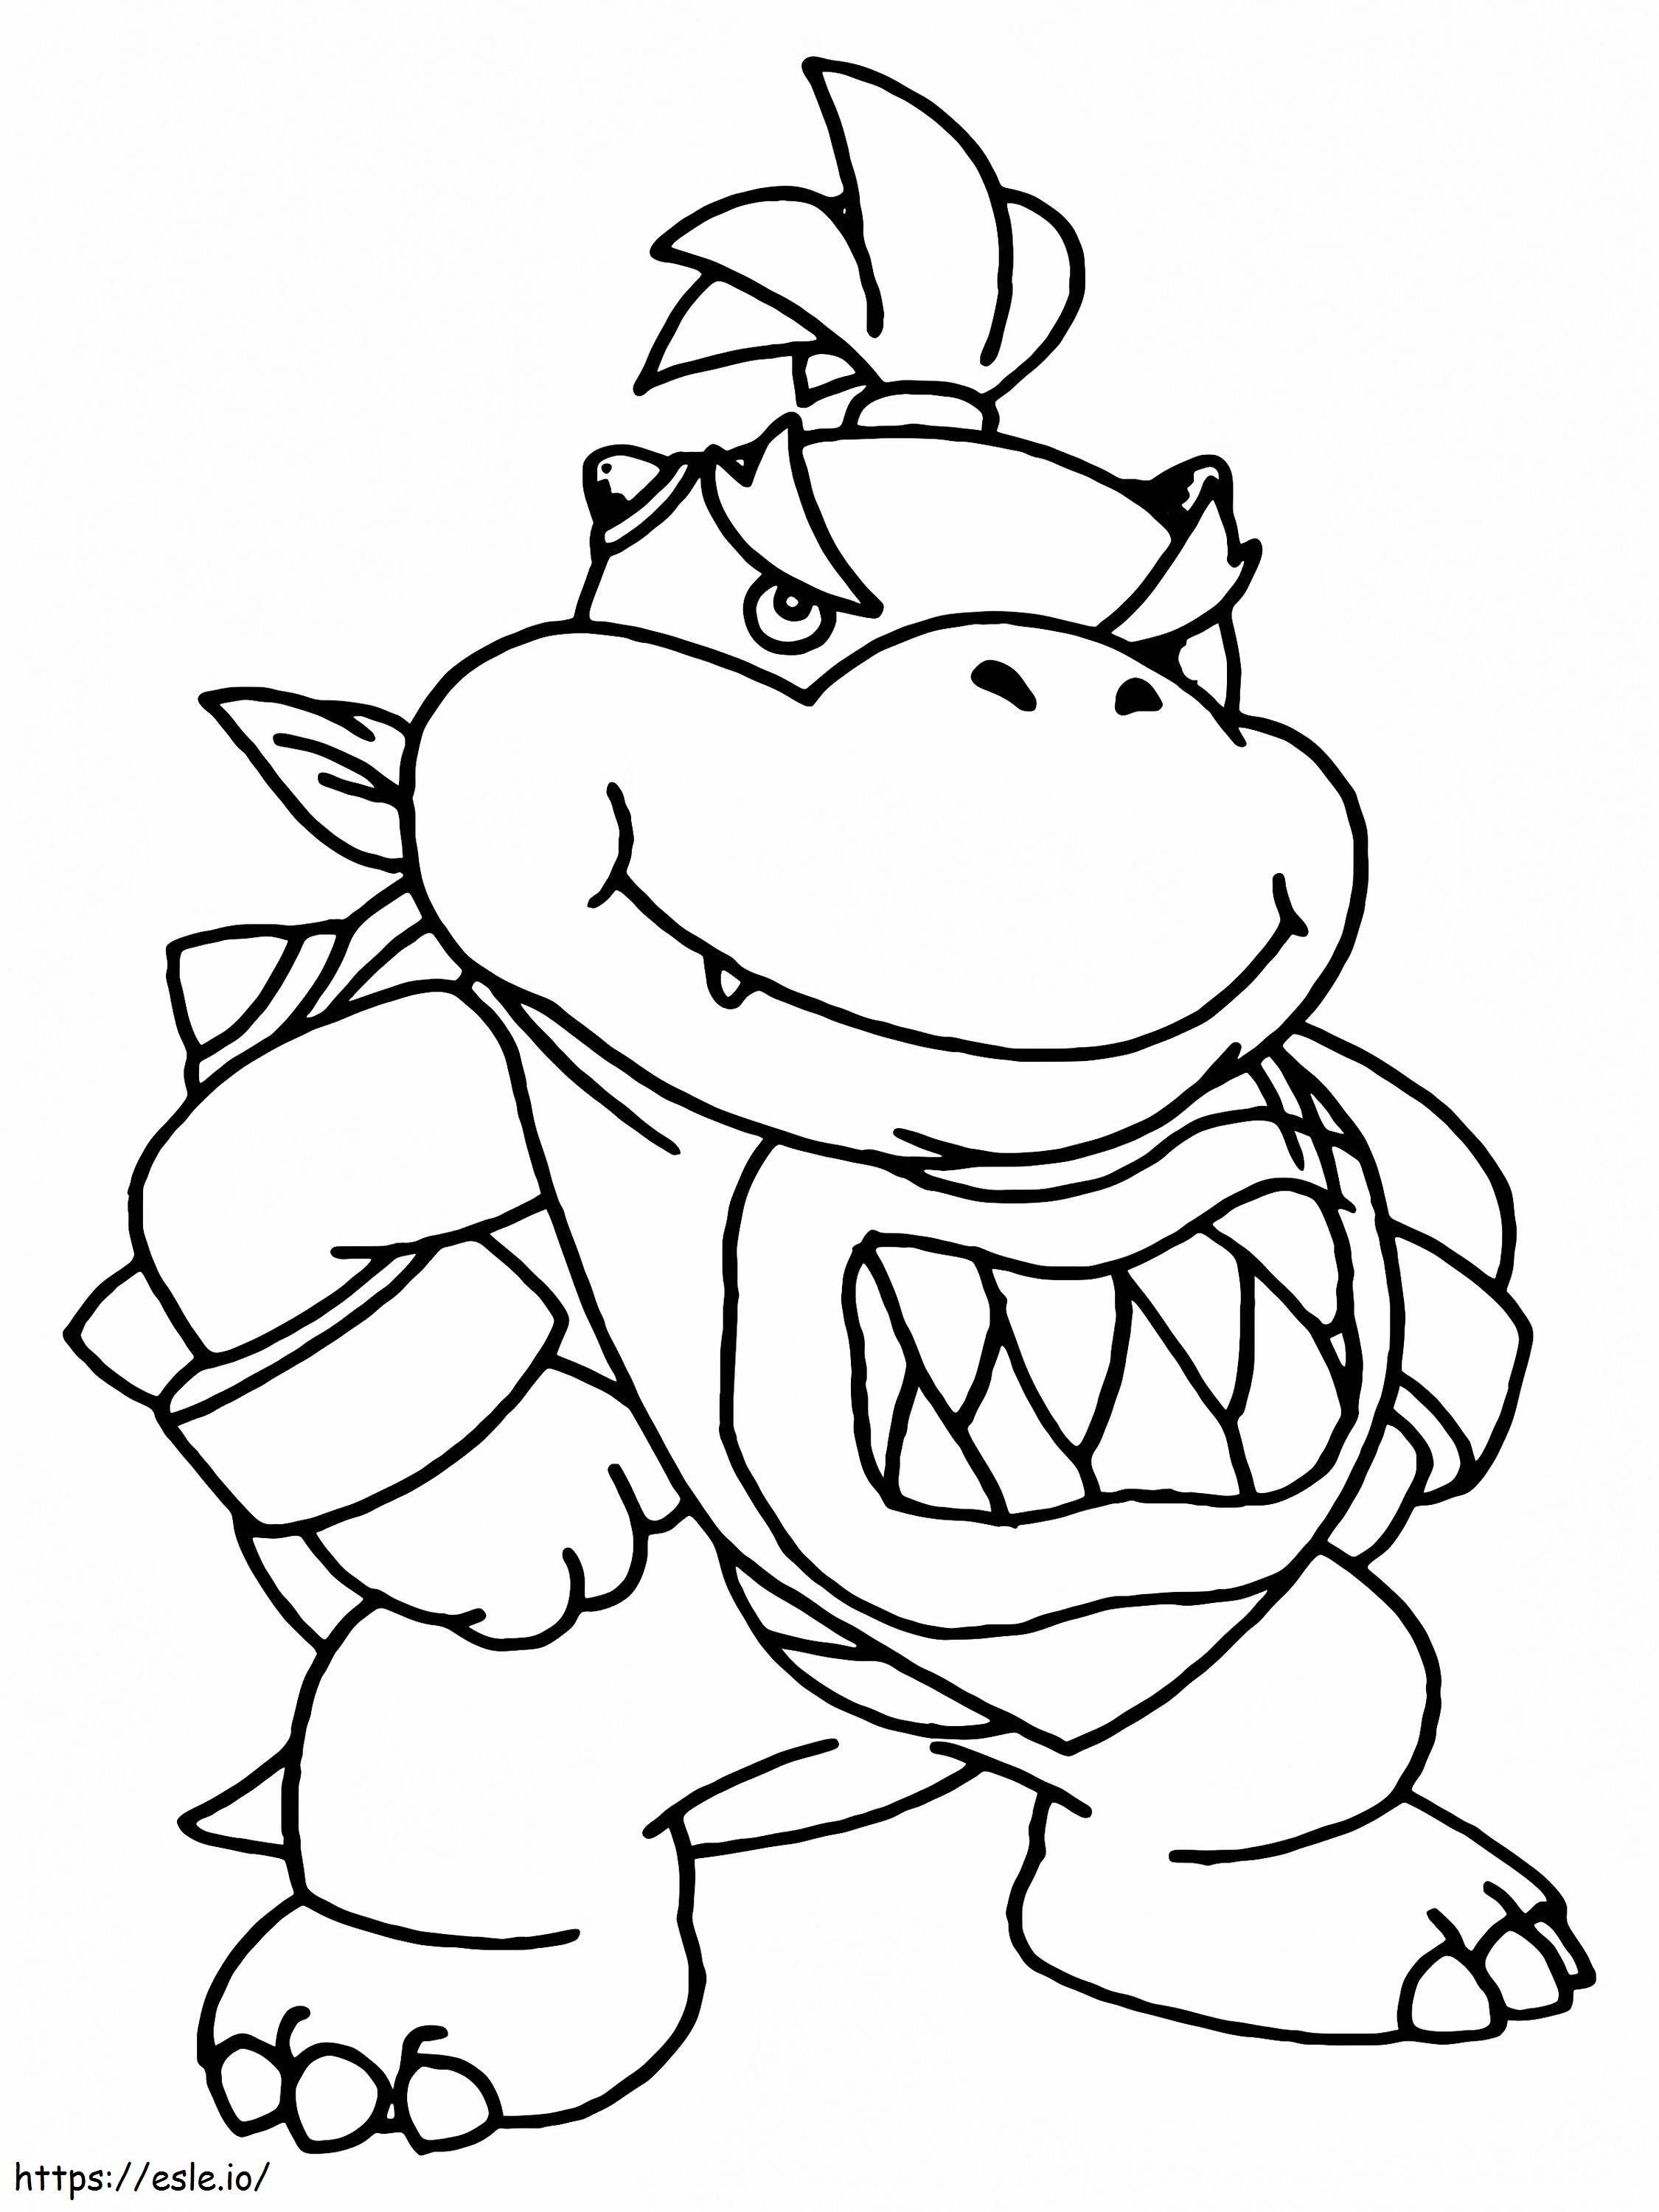 Prepared Baby Bowser coloring page